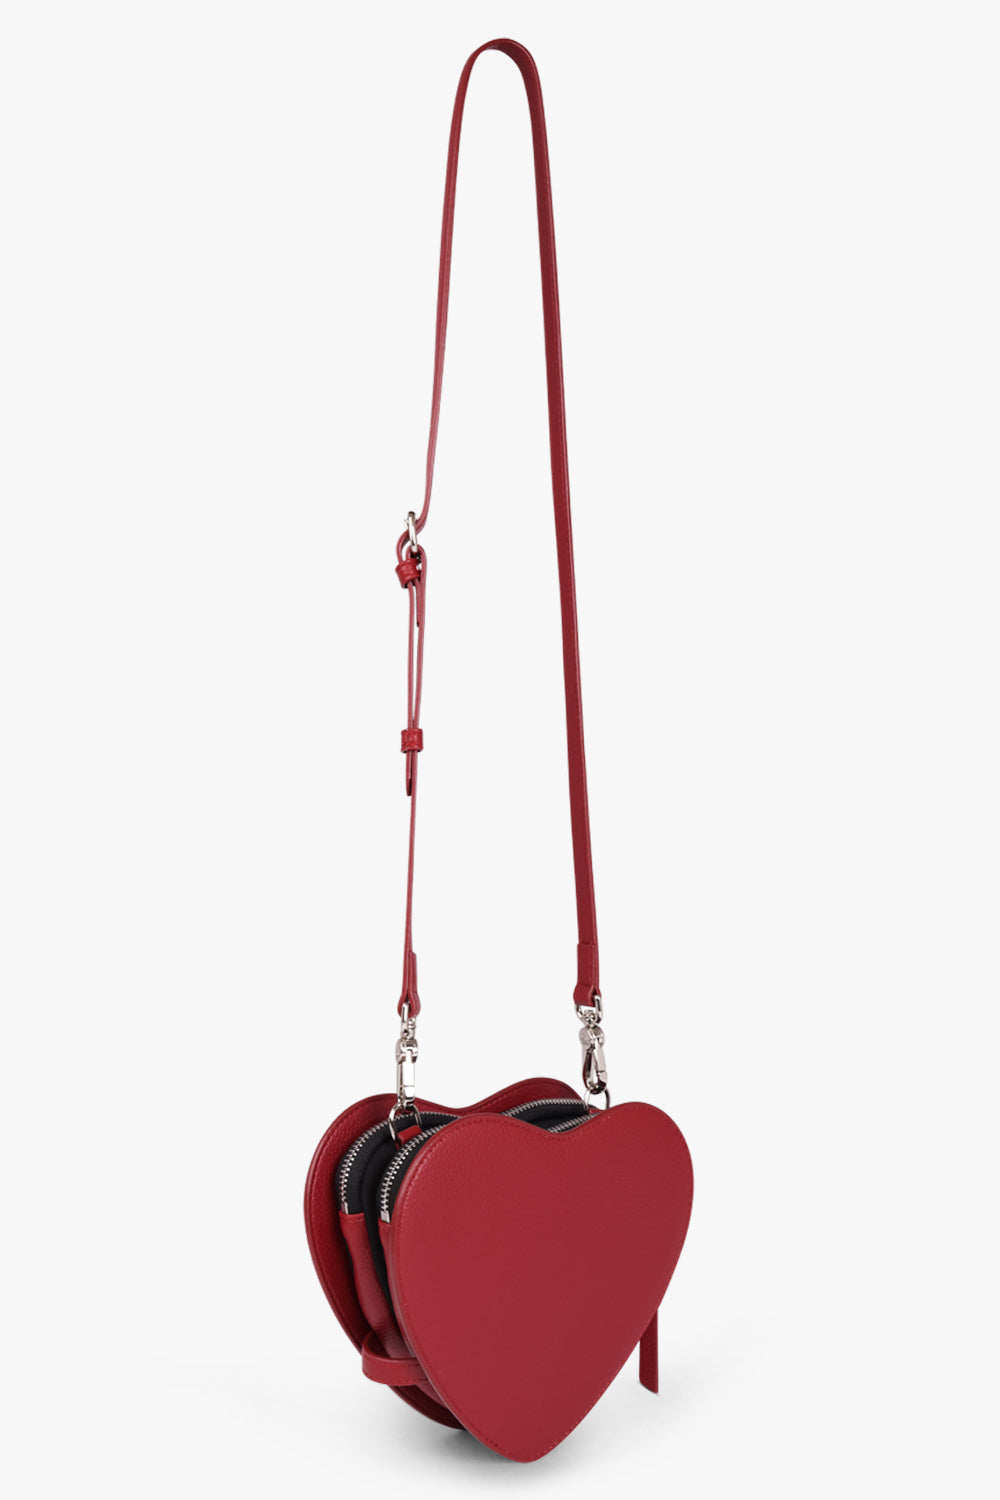 VIVIENNE WESTWOOD LOUISE HEART CROSSBODY BAG RED SILVER PARLOUR X